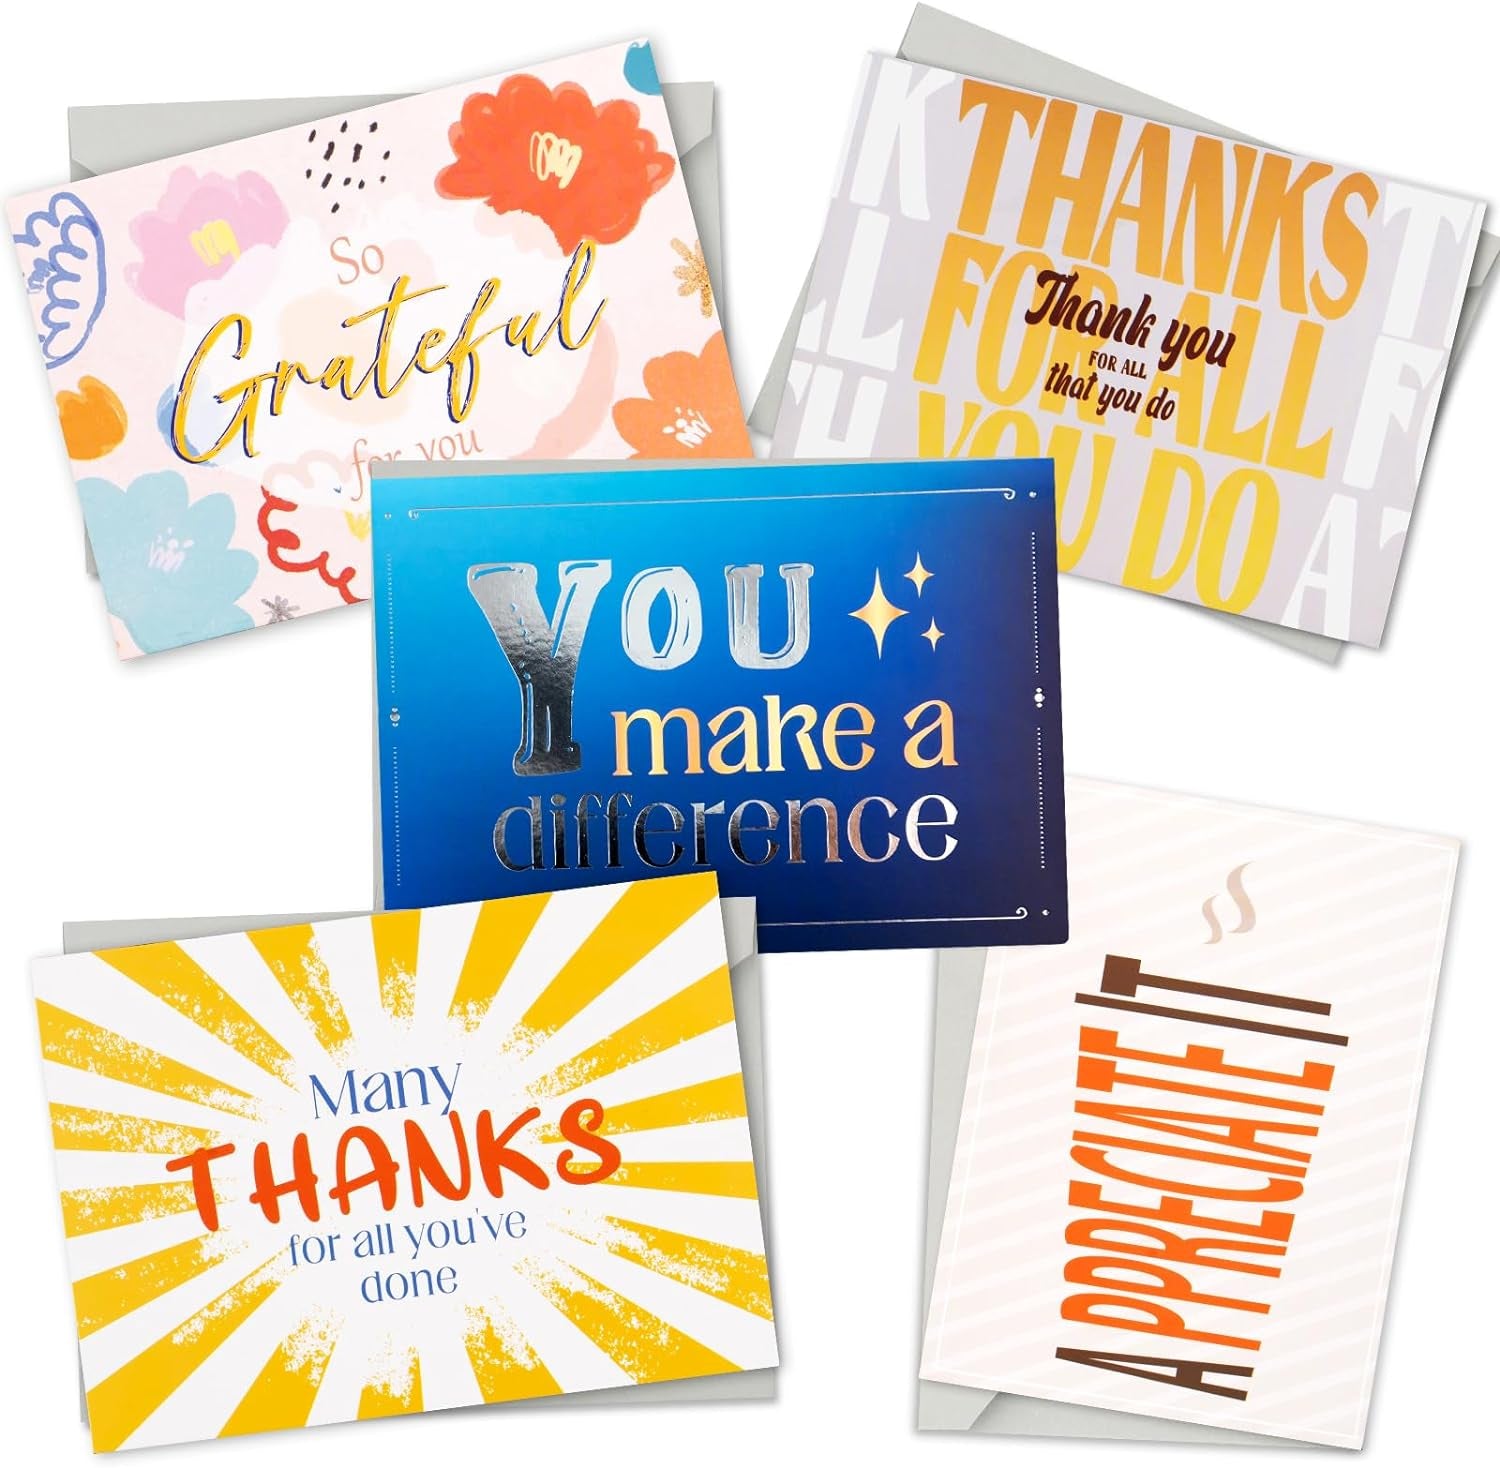 30 Teacher Appreciation Cards Bulk with Envelopes - Teacher Thank You Cards 300GSM Blank Greeting Cards for Teachers, Employees, Nurse, Volunteers and Doctor